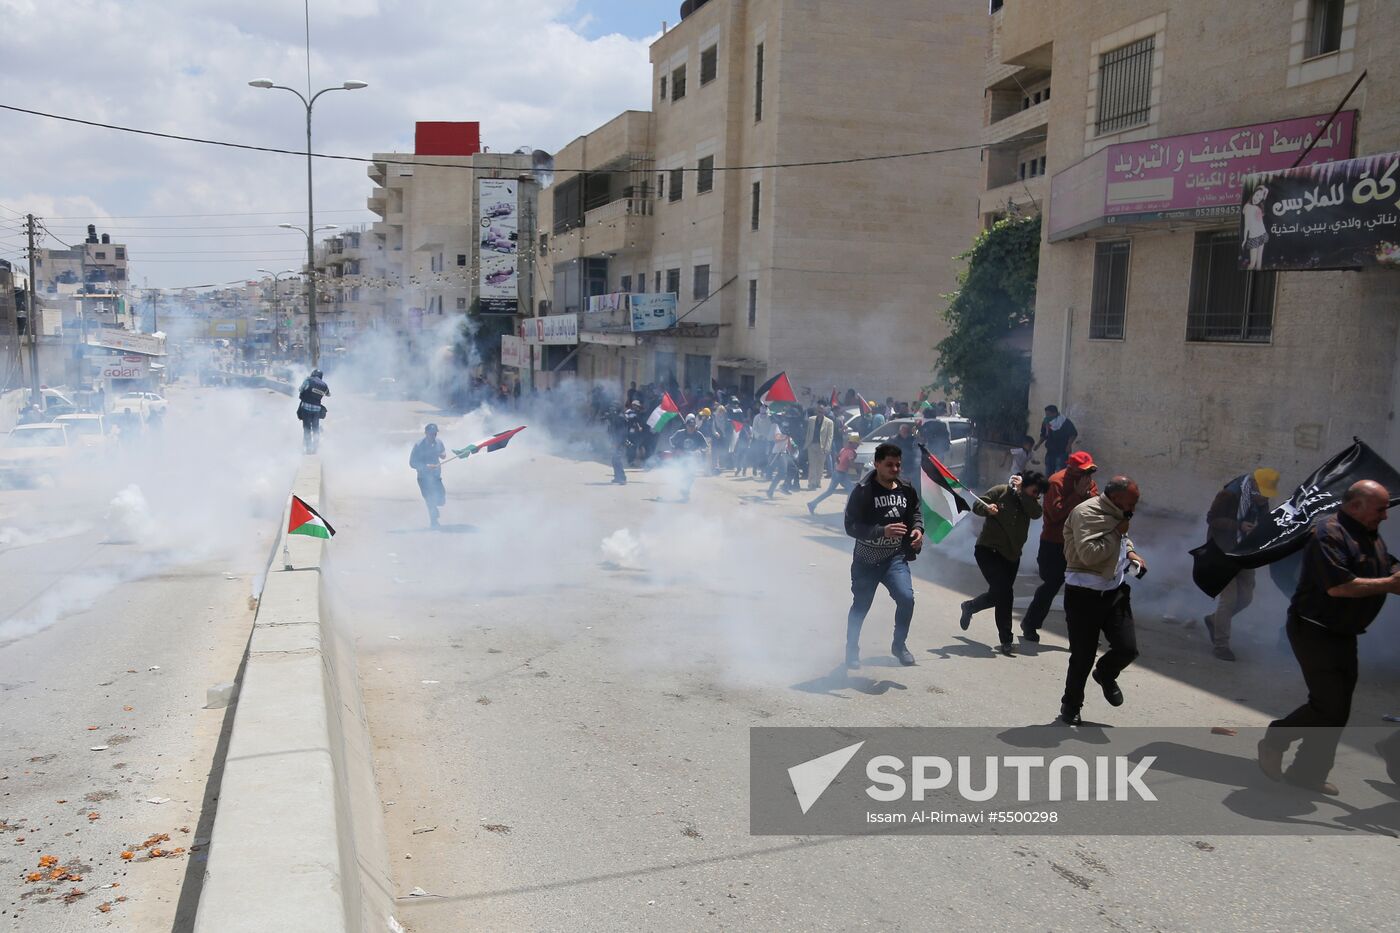 Protests in Palestine due to US Embassy transfer to Jerusalem